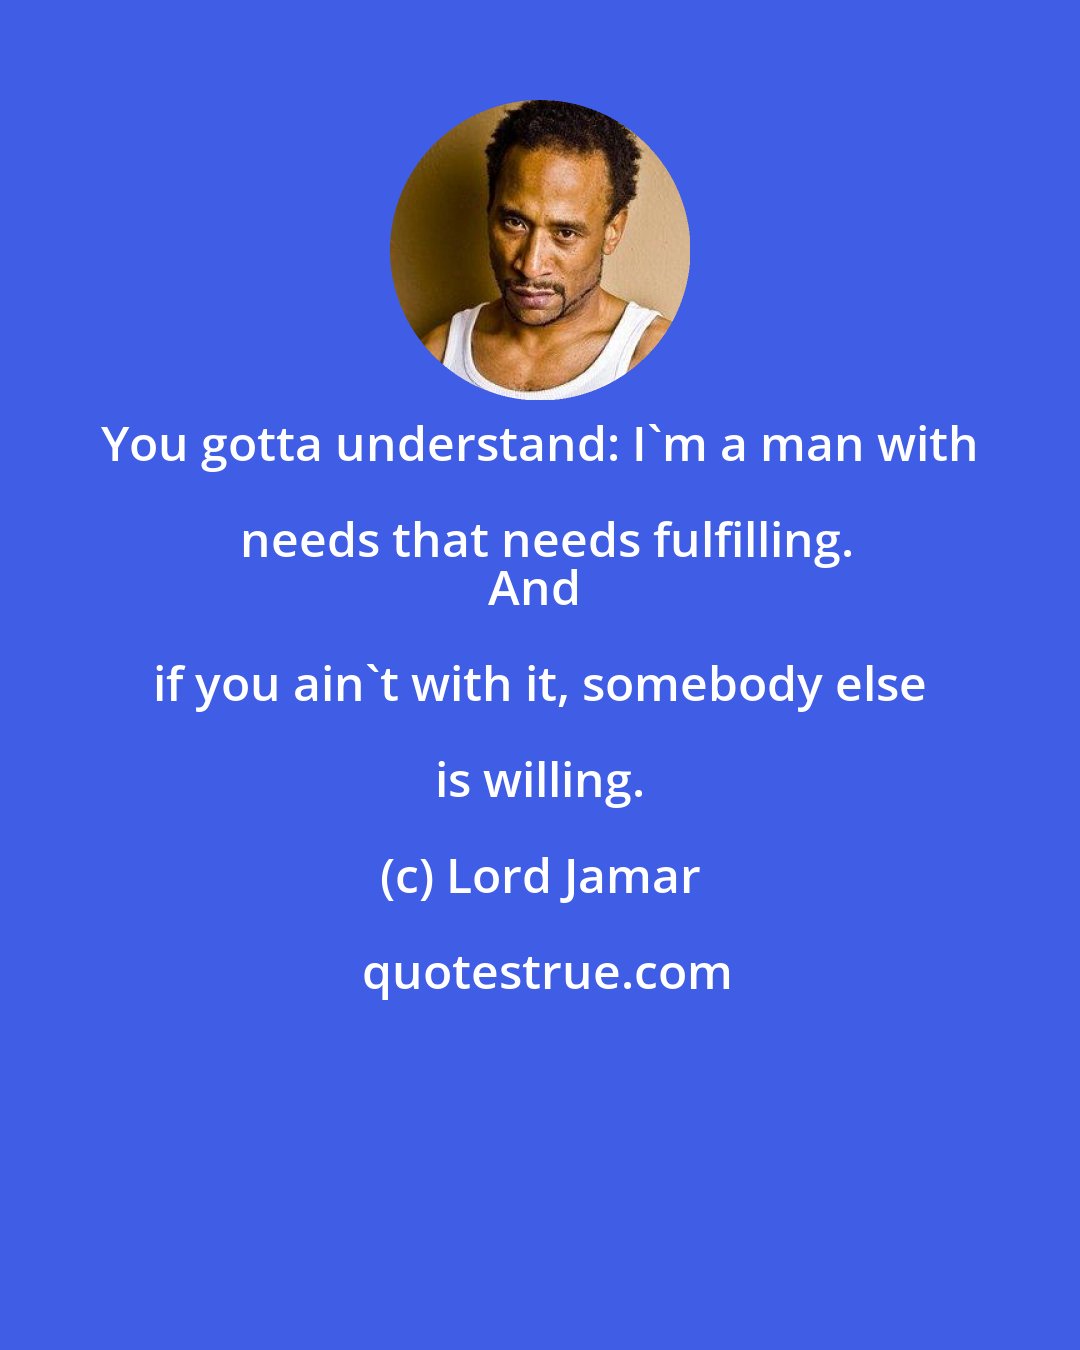 Lord Jamar: You gotta understand: I'm a man with needs that needs fulfilling.
And if you ain't with it, somebody else is willing.